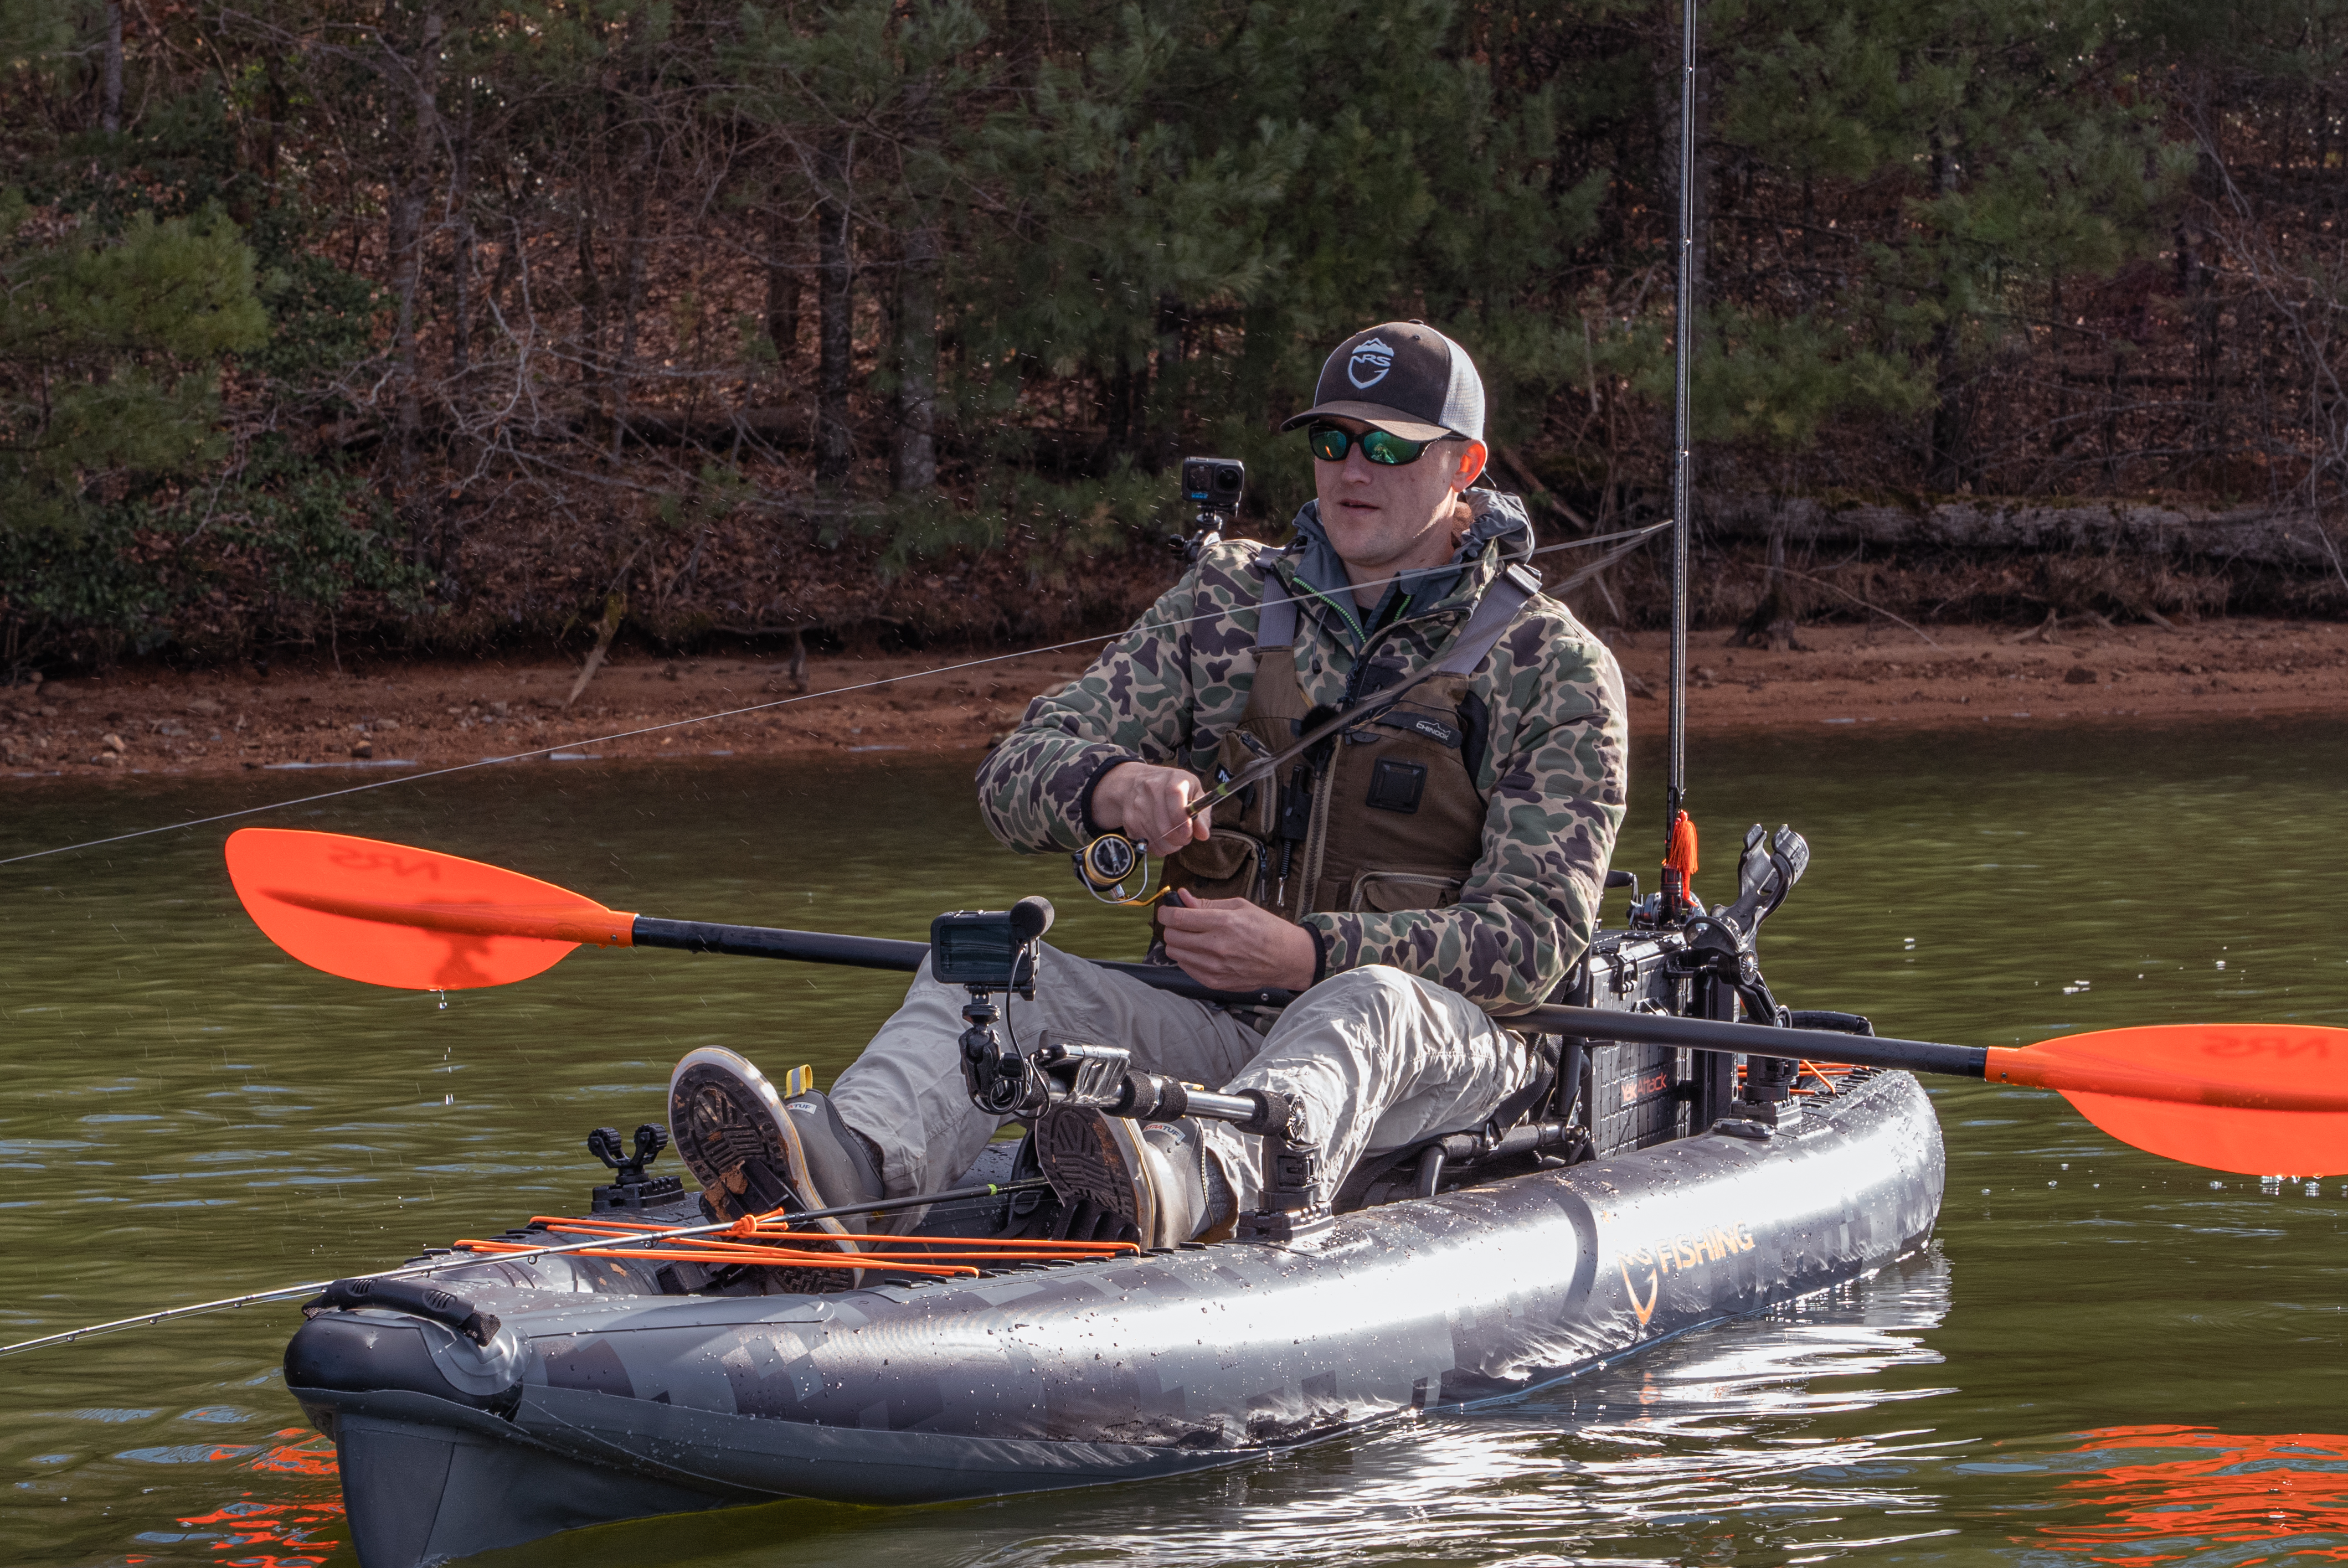 Kayak Vs Inflatable Pontoon: Which is Better for Fishing?